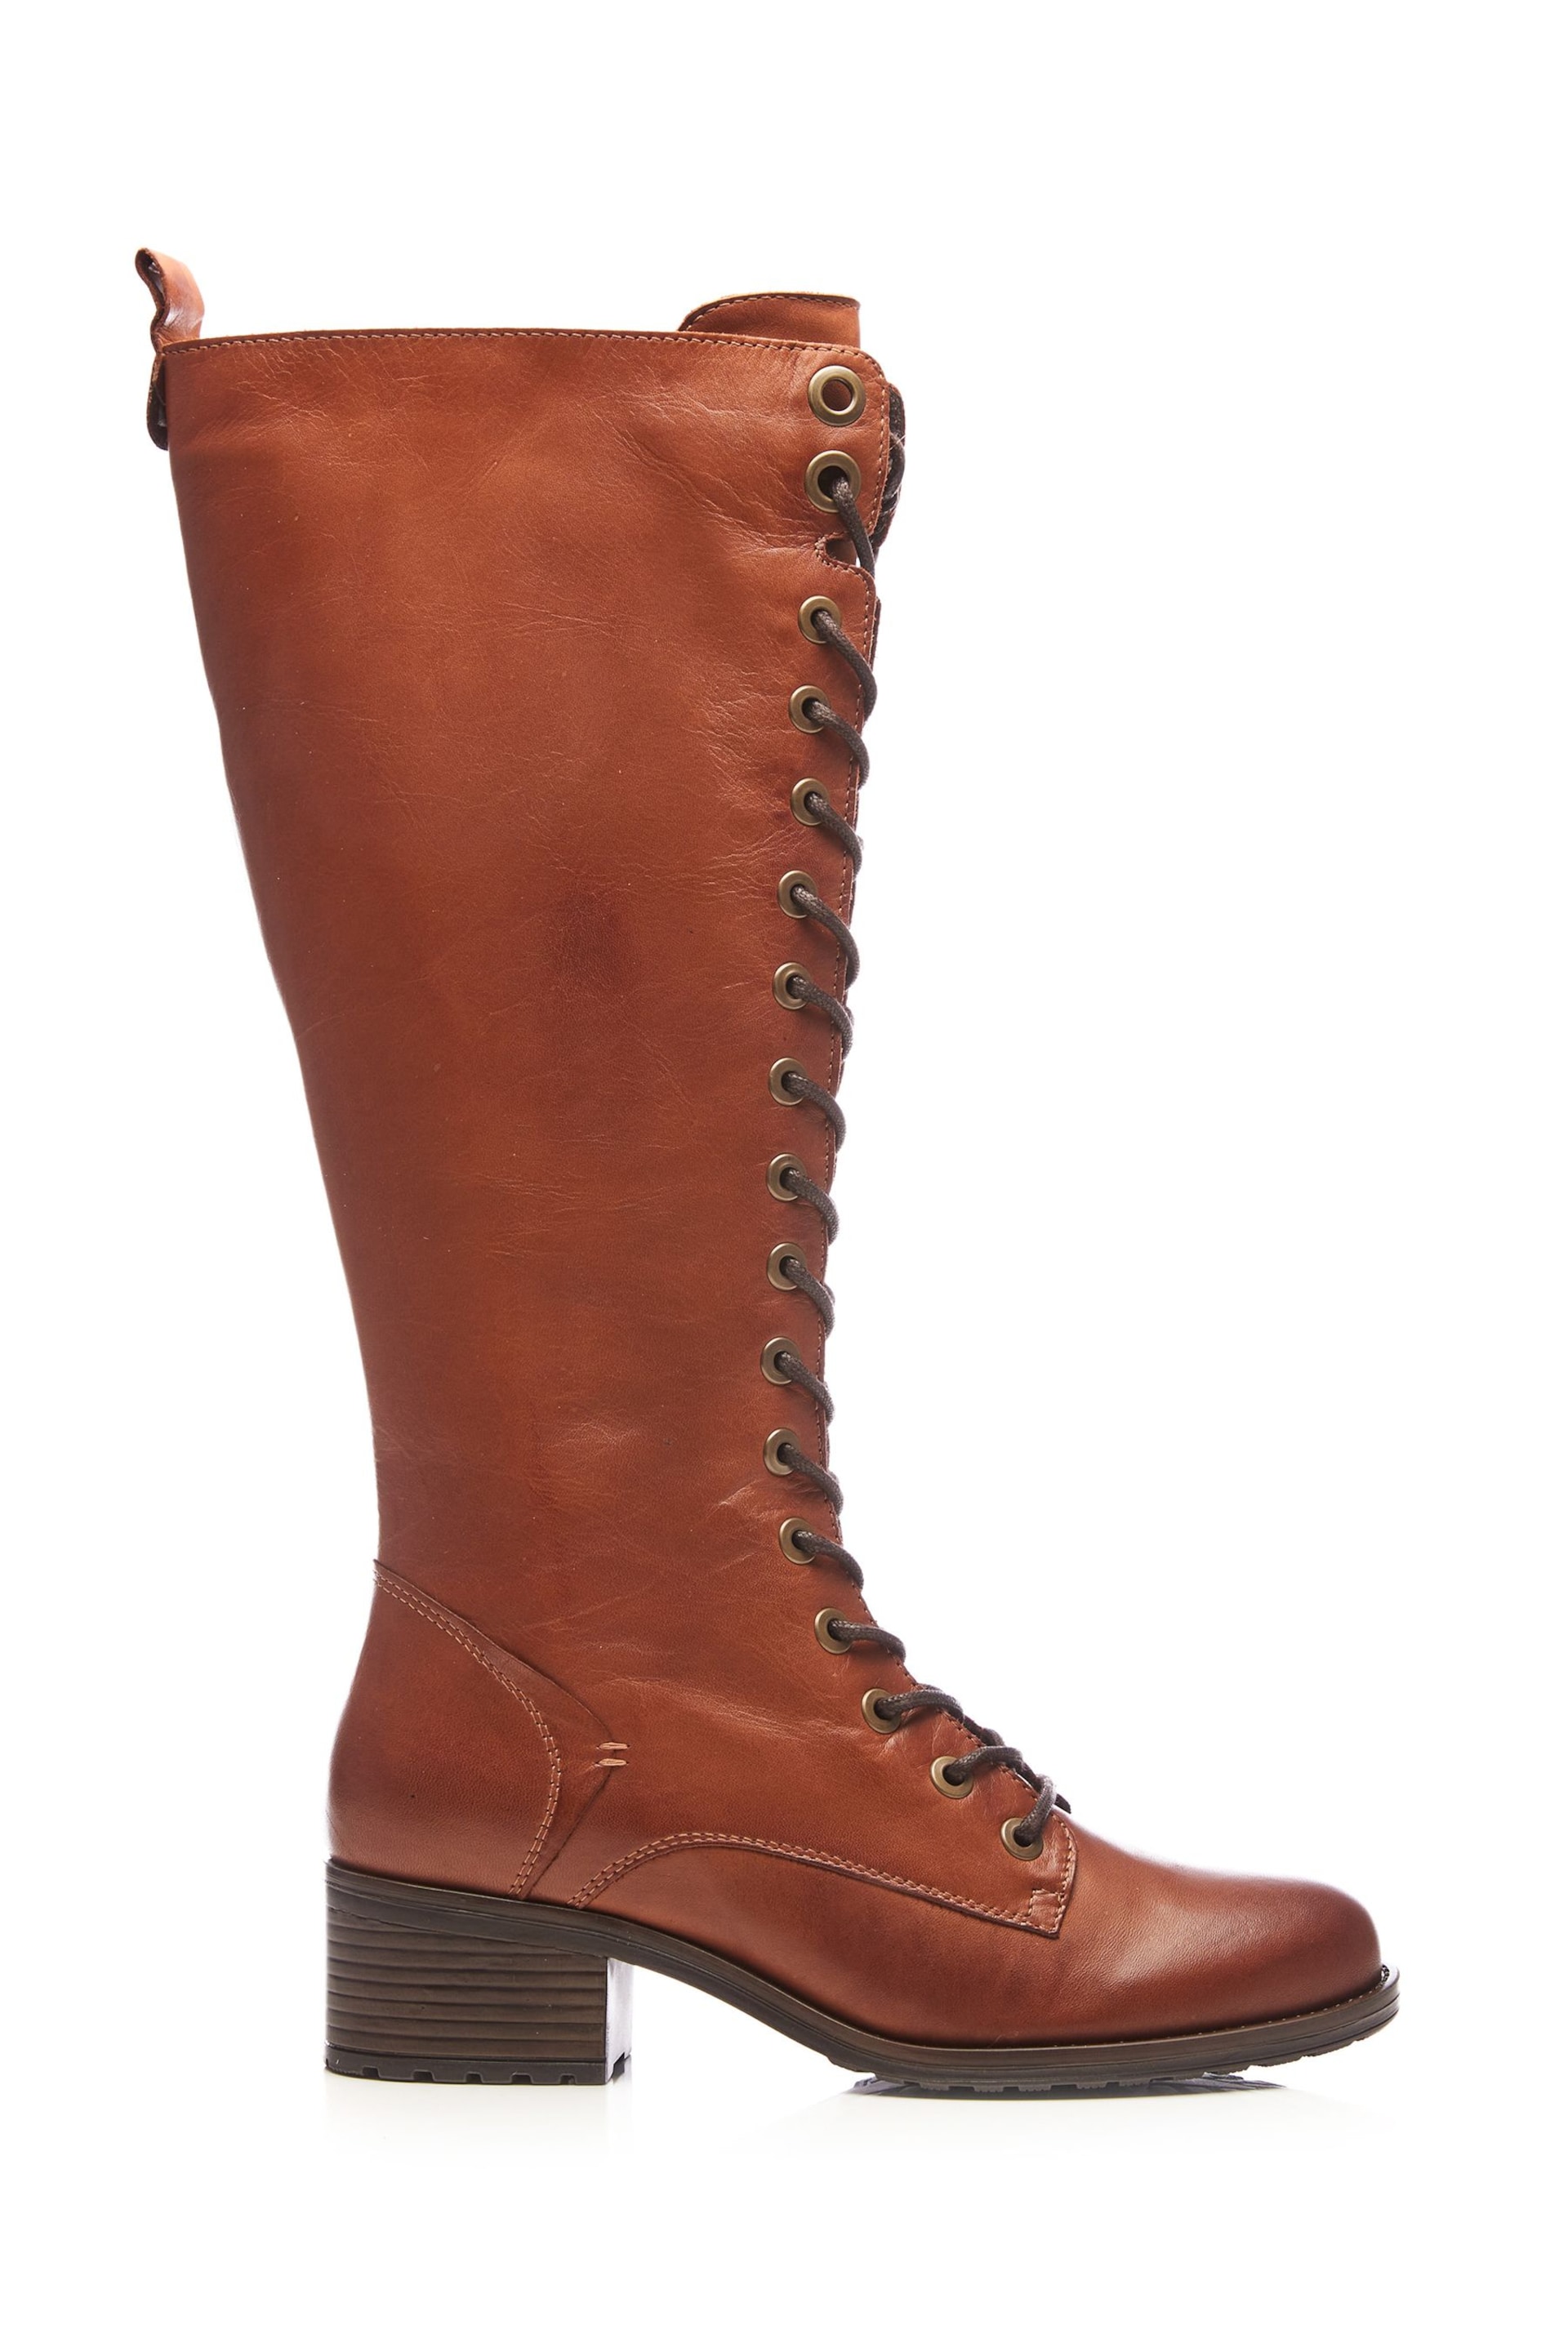 Moda In Pelle Hailey Lace-Up Knee High Leather Boots - Image 1 of 6